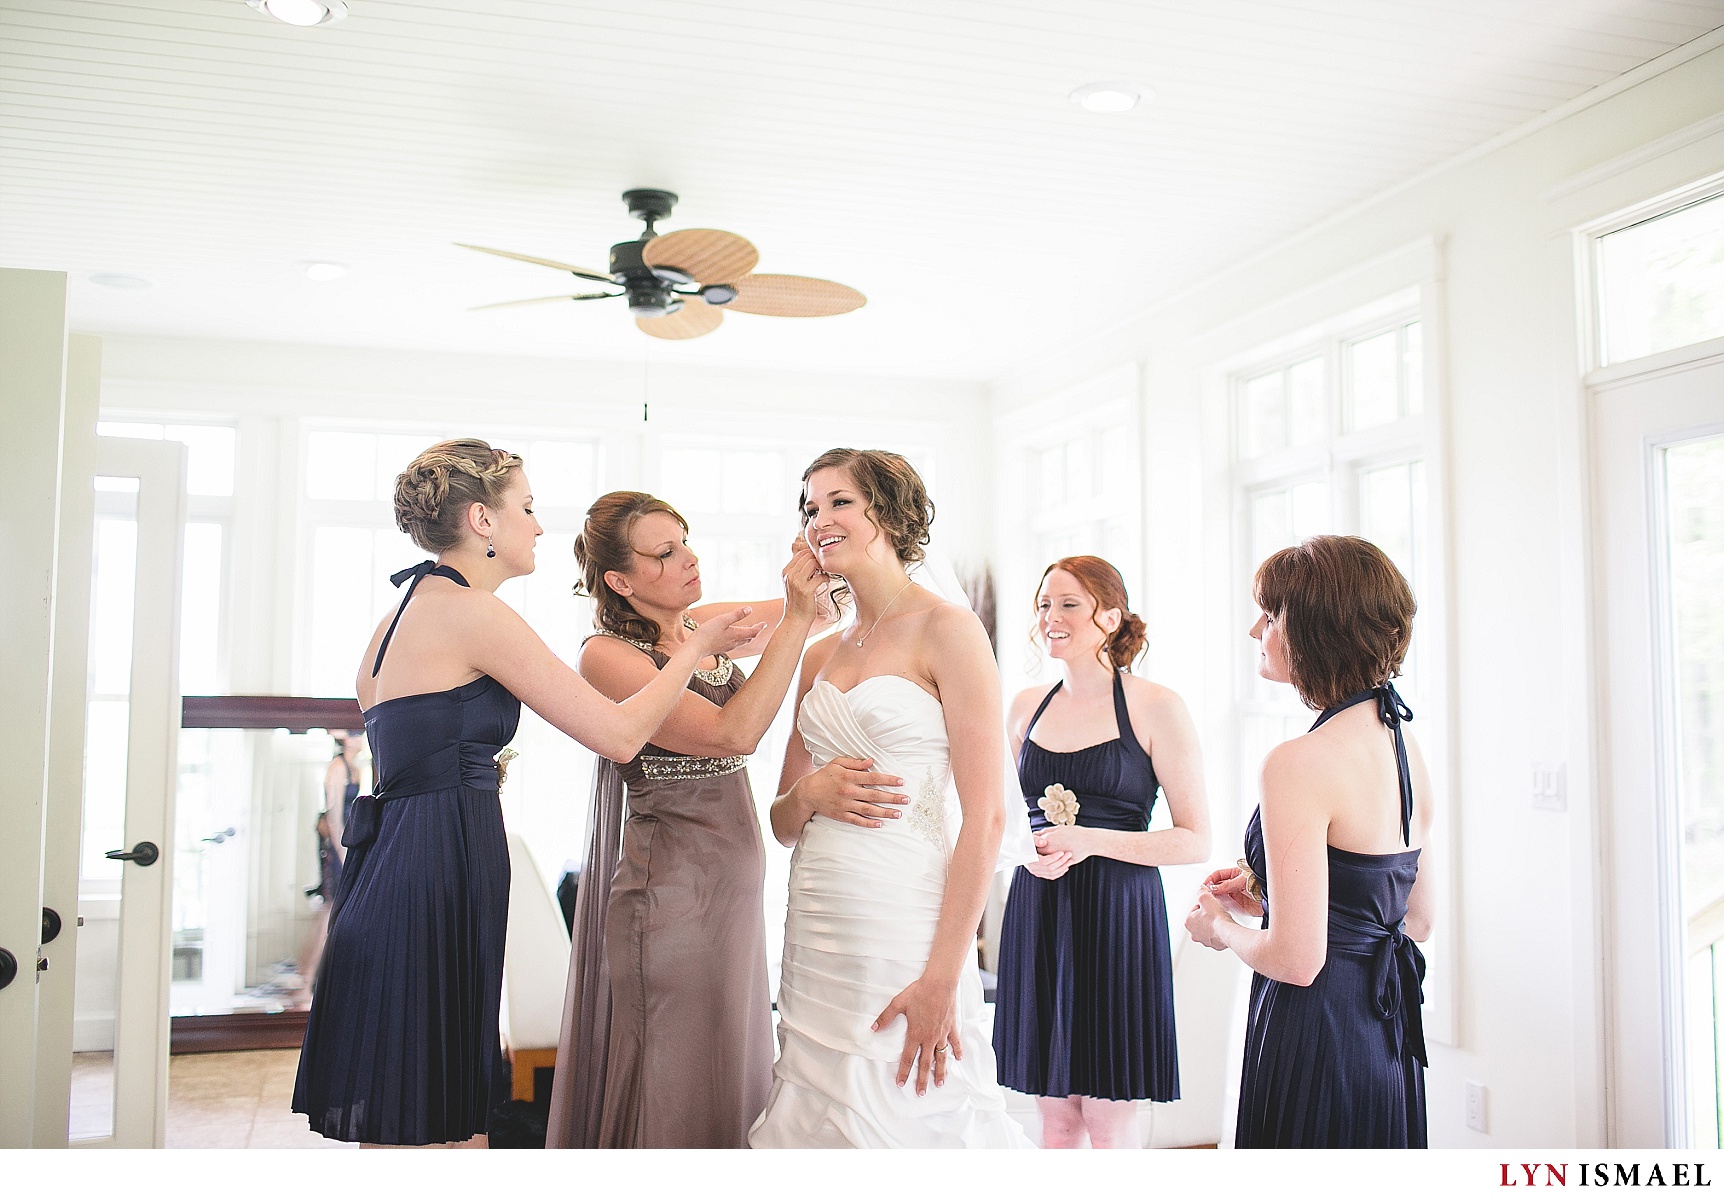 the bride gets ready in a bright room